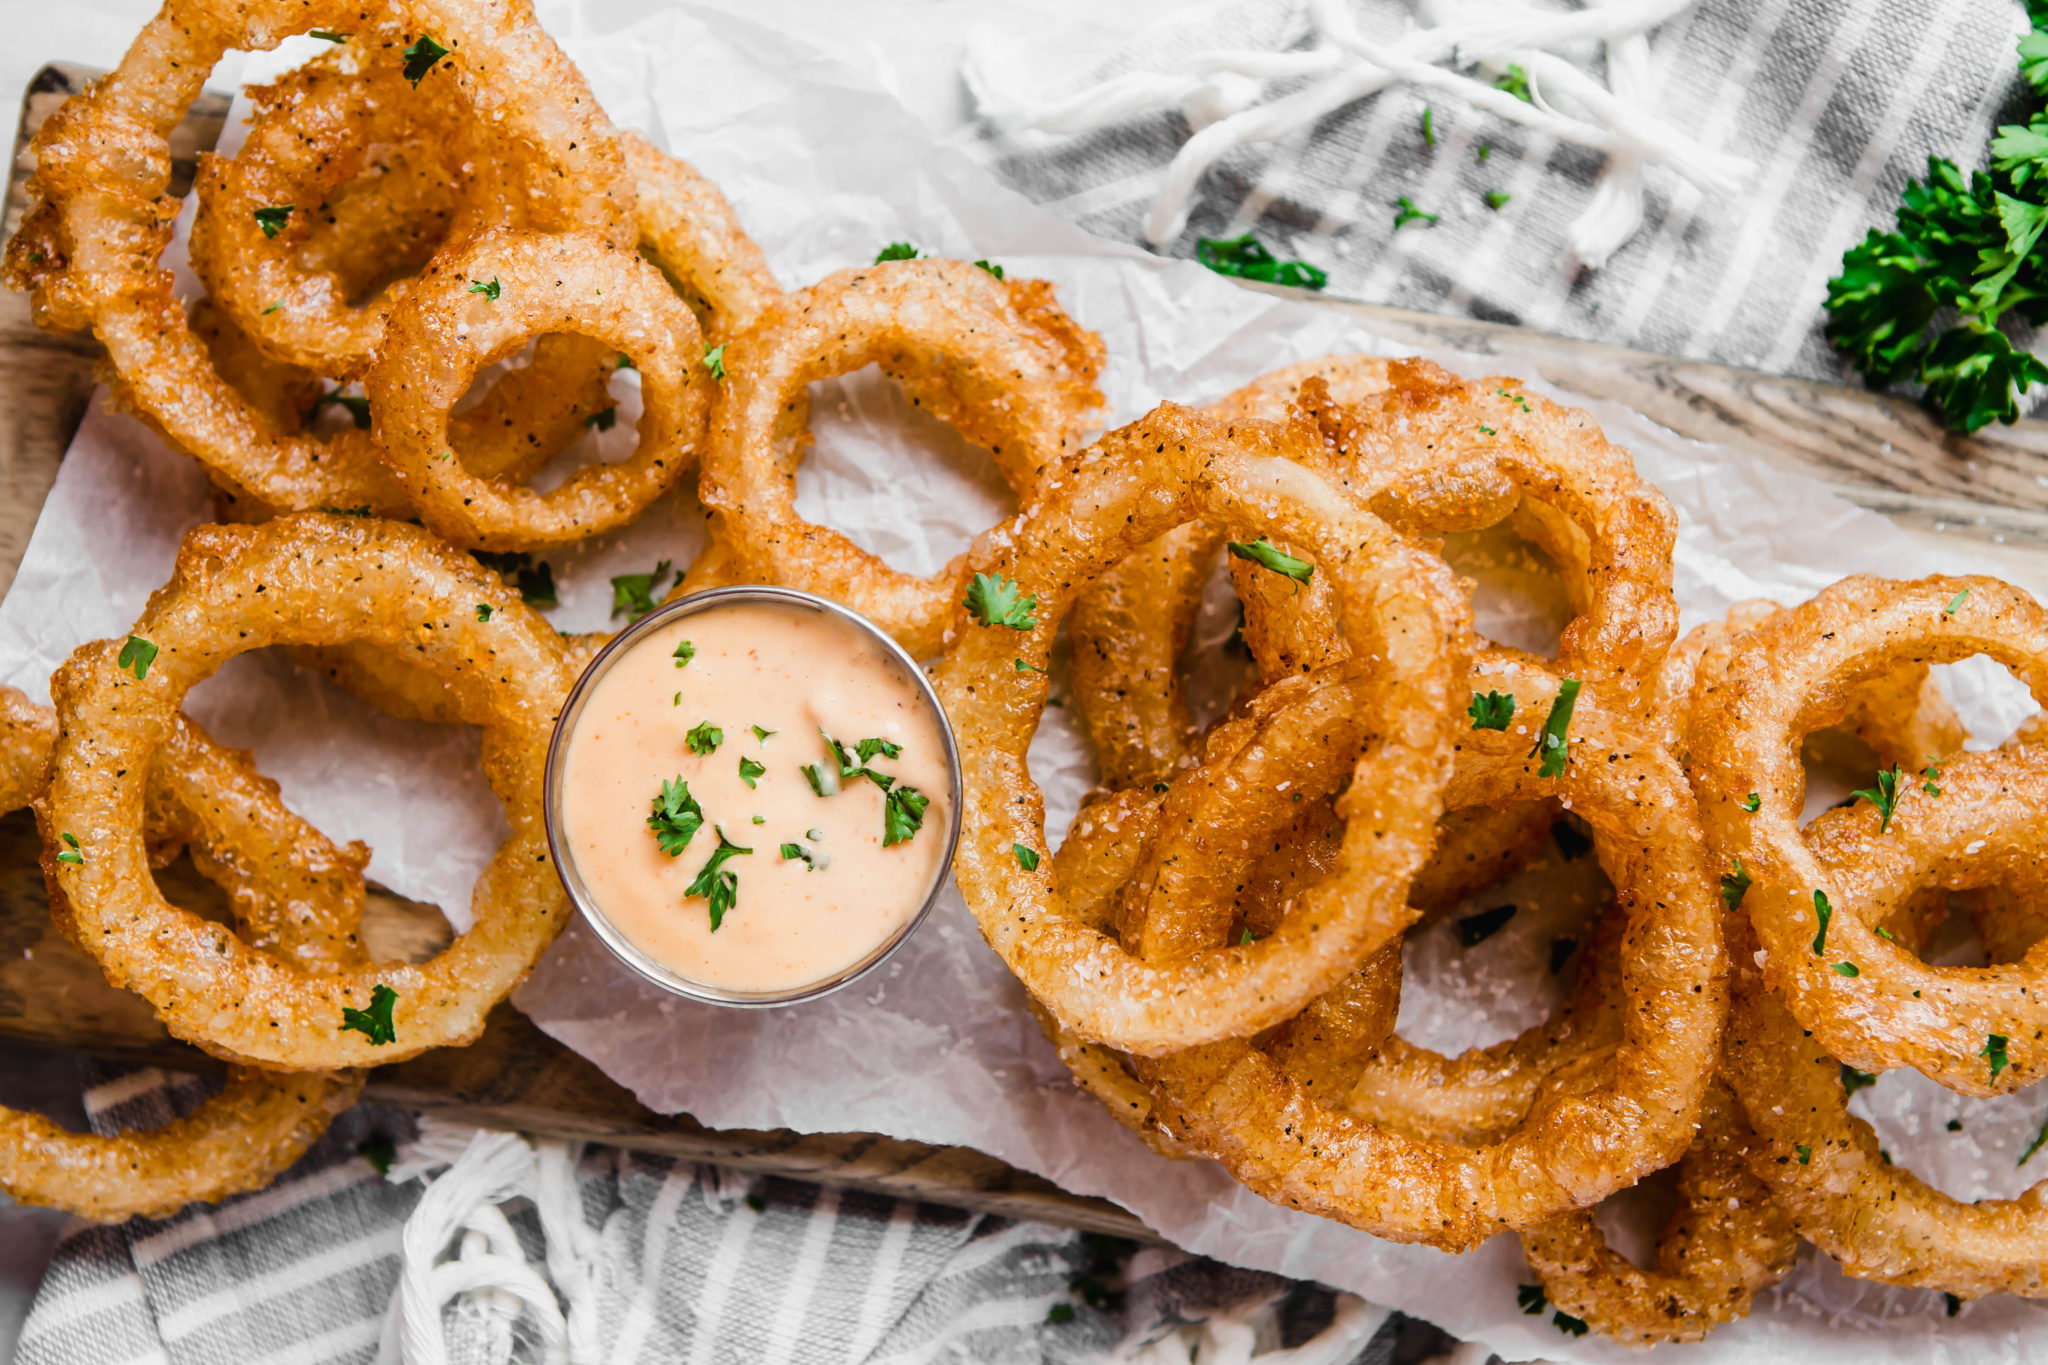 Homemade Onion Rings - Served From Scratch